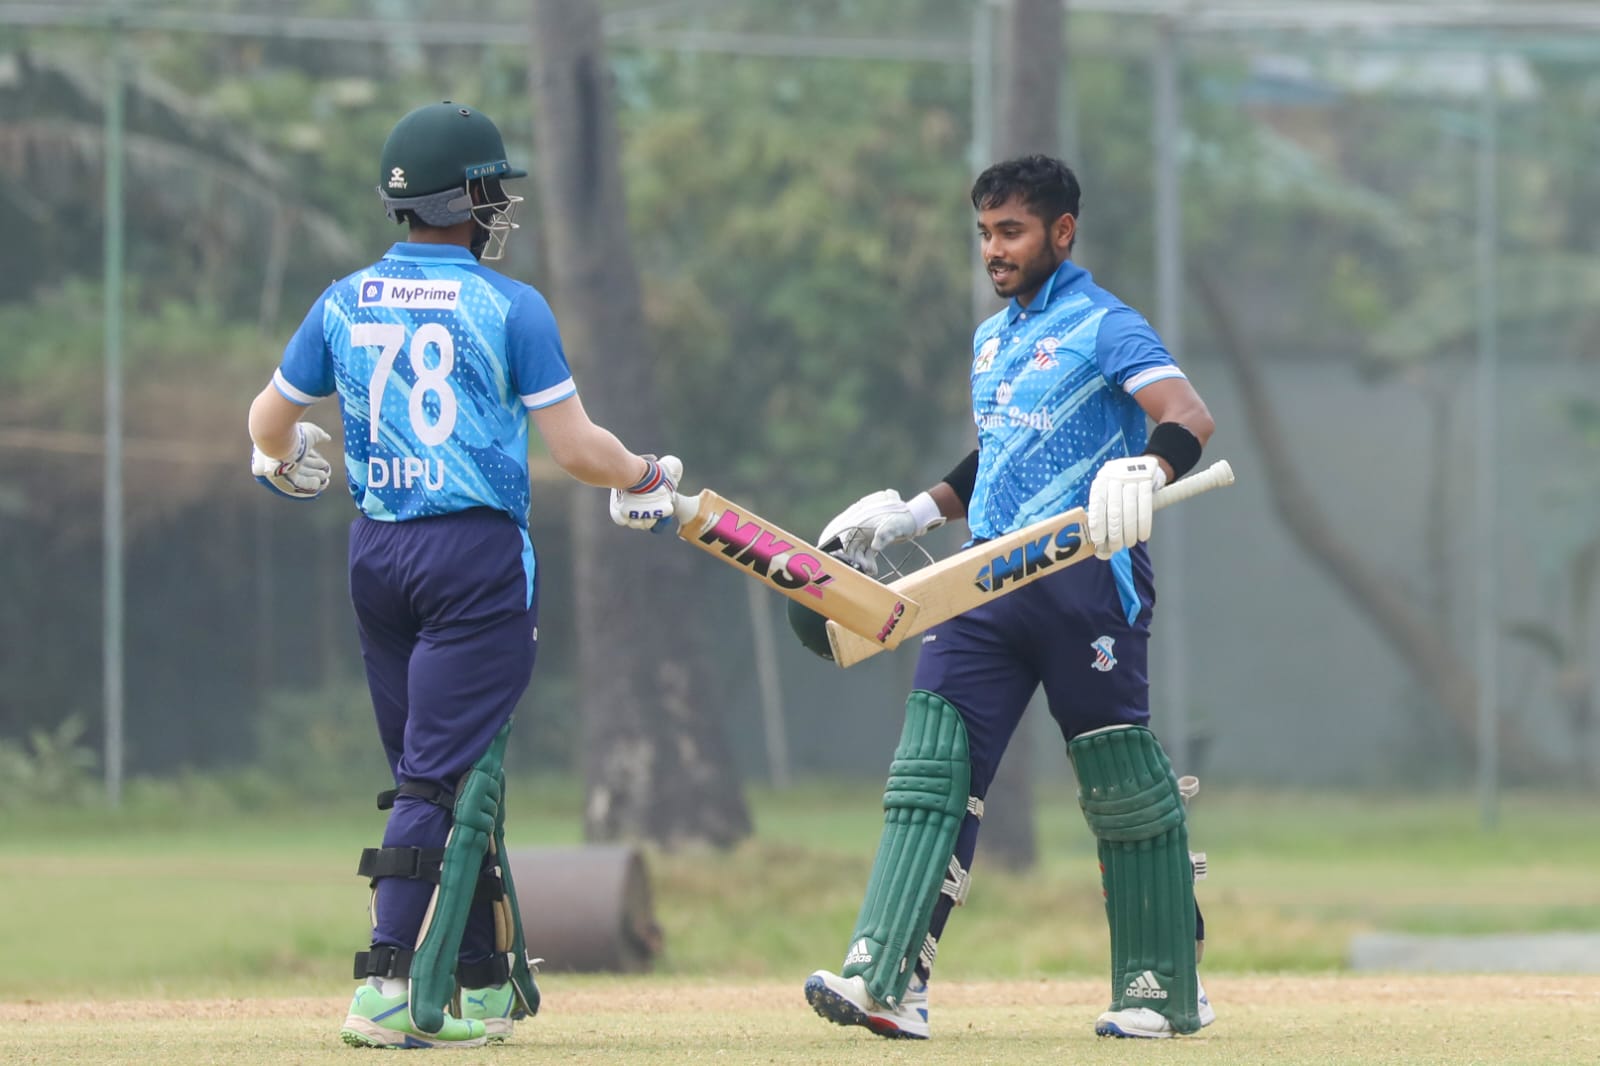 Shahadat-Parvez hit centuries to gift Prime Bank big win against Brothers